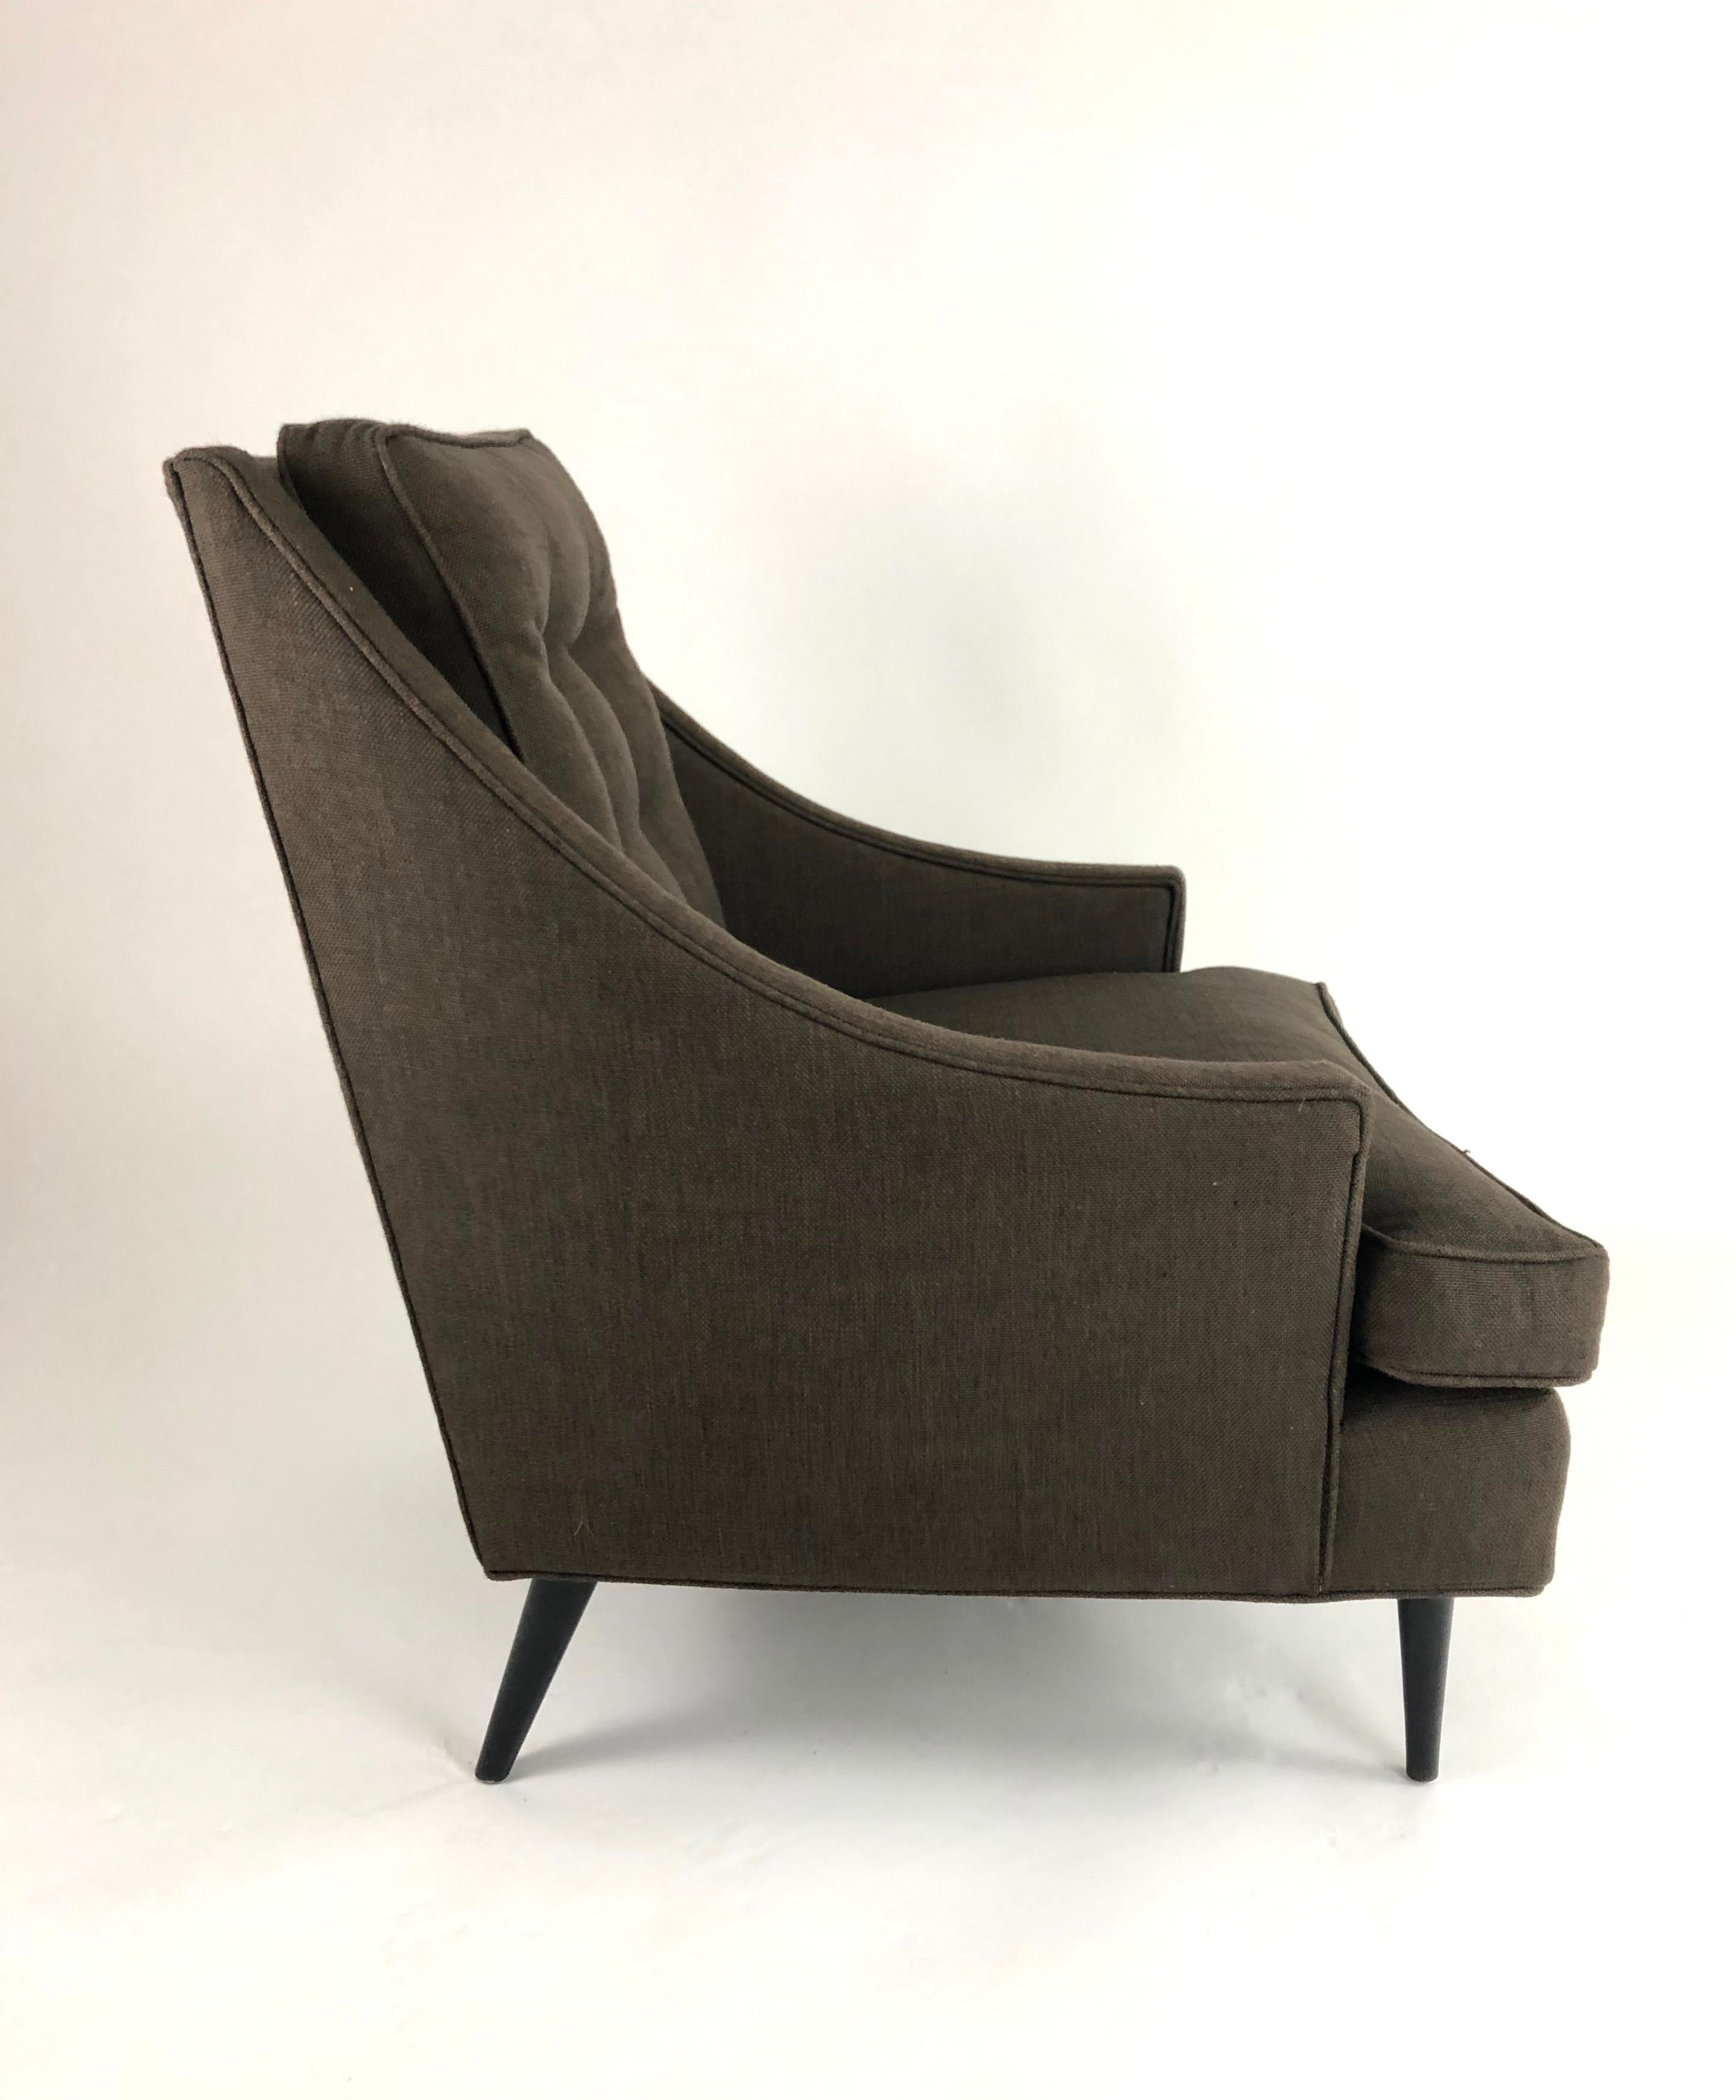 Mid-20th Century Pair of Mid-Century Modern Upholstered Lounge Chairs